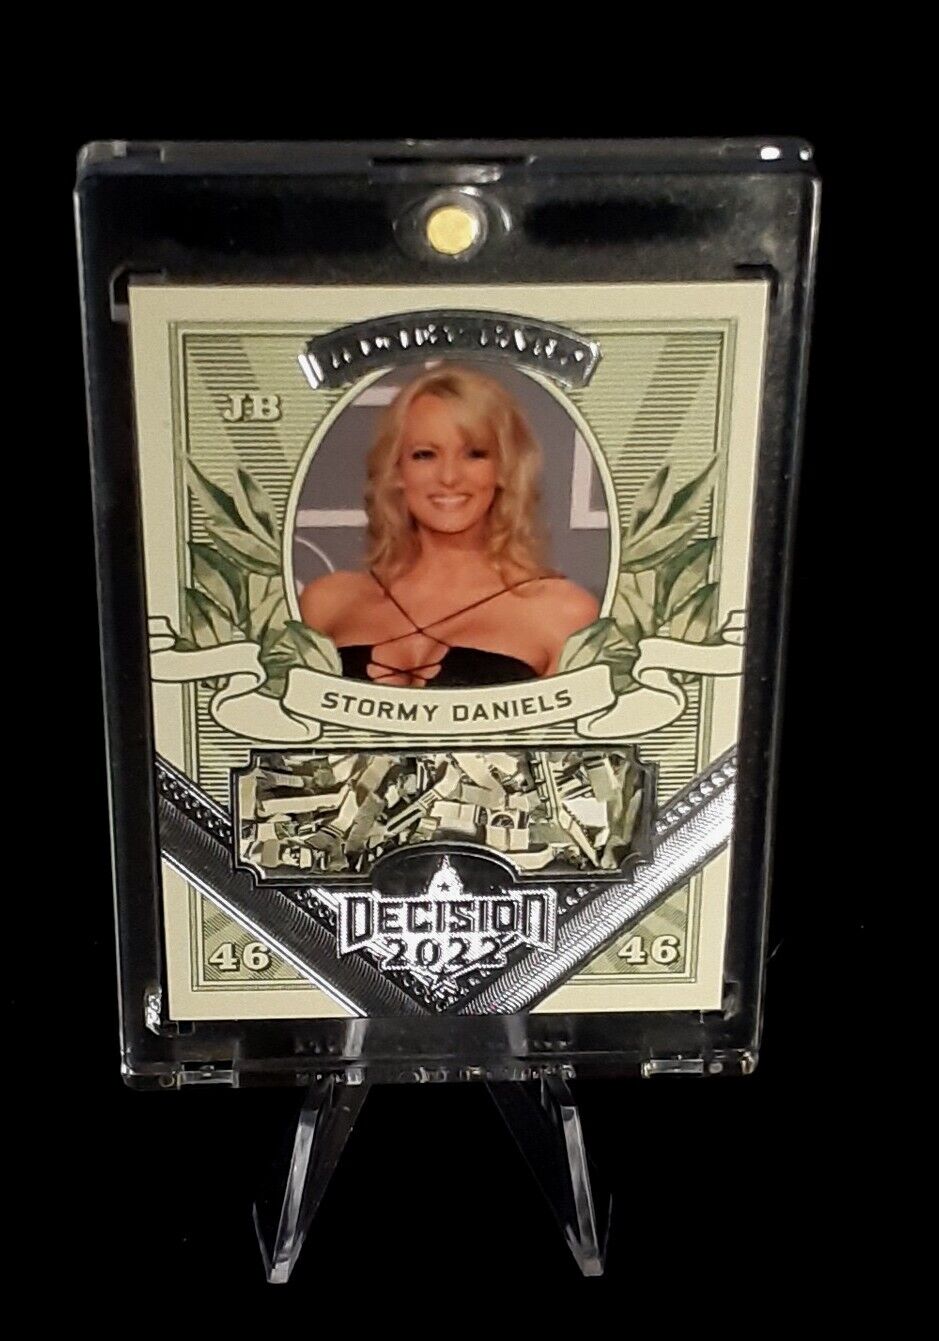 DECISION 2022 STORMY DANIELS HUSH MONEY CARD M033 AKA ELECTION INTERFERENCE